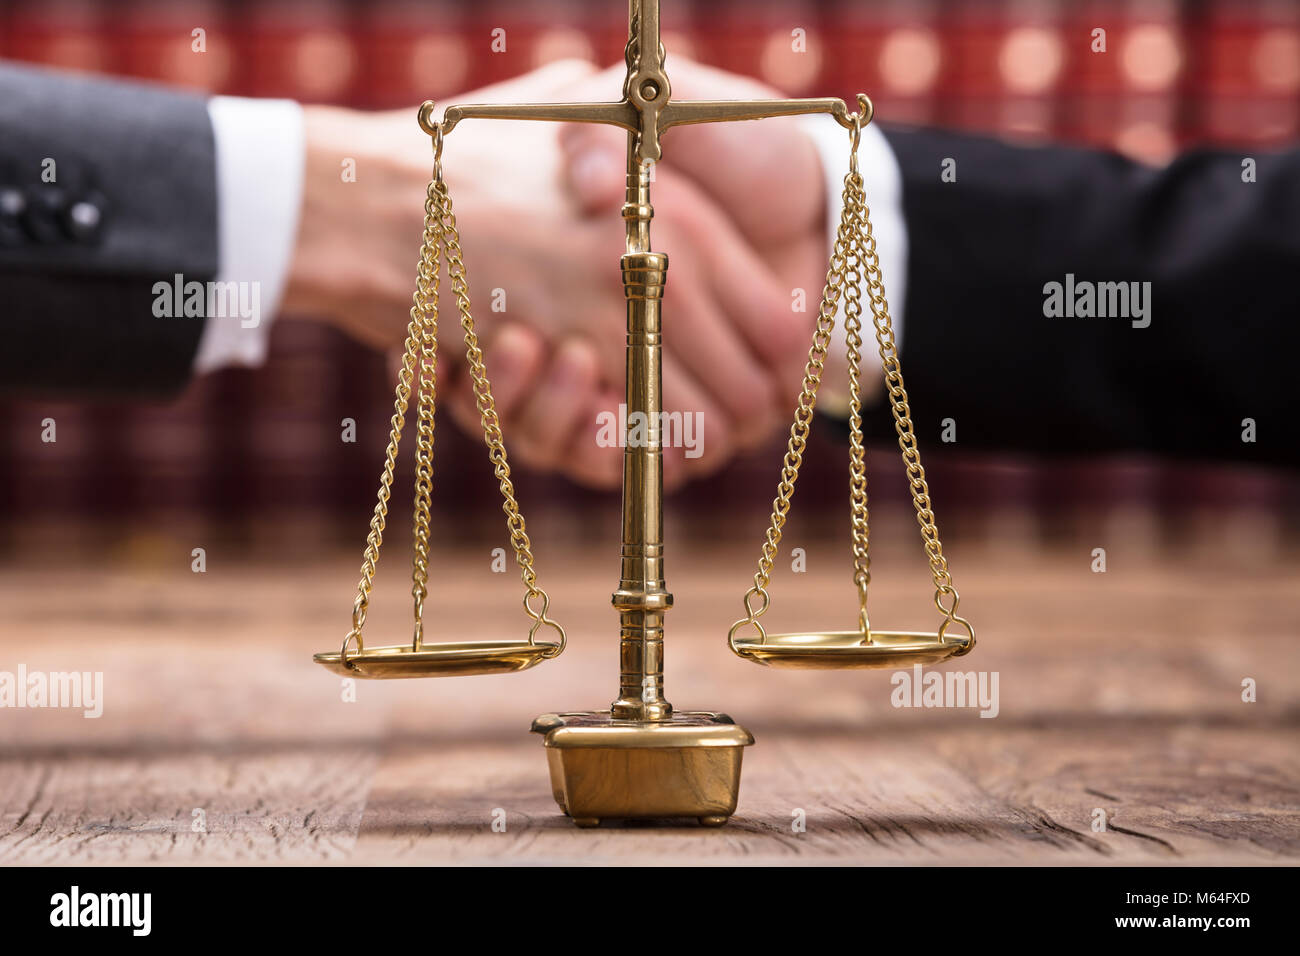 Close-up Of Justice Scale On Wooden Desk In Front Of Businesspeople Shaking Hands Stock Photo